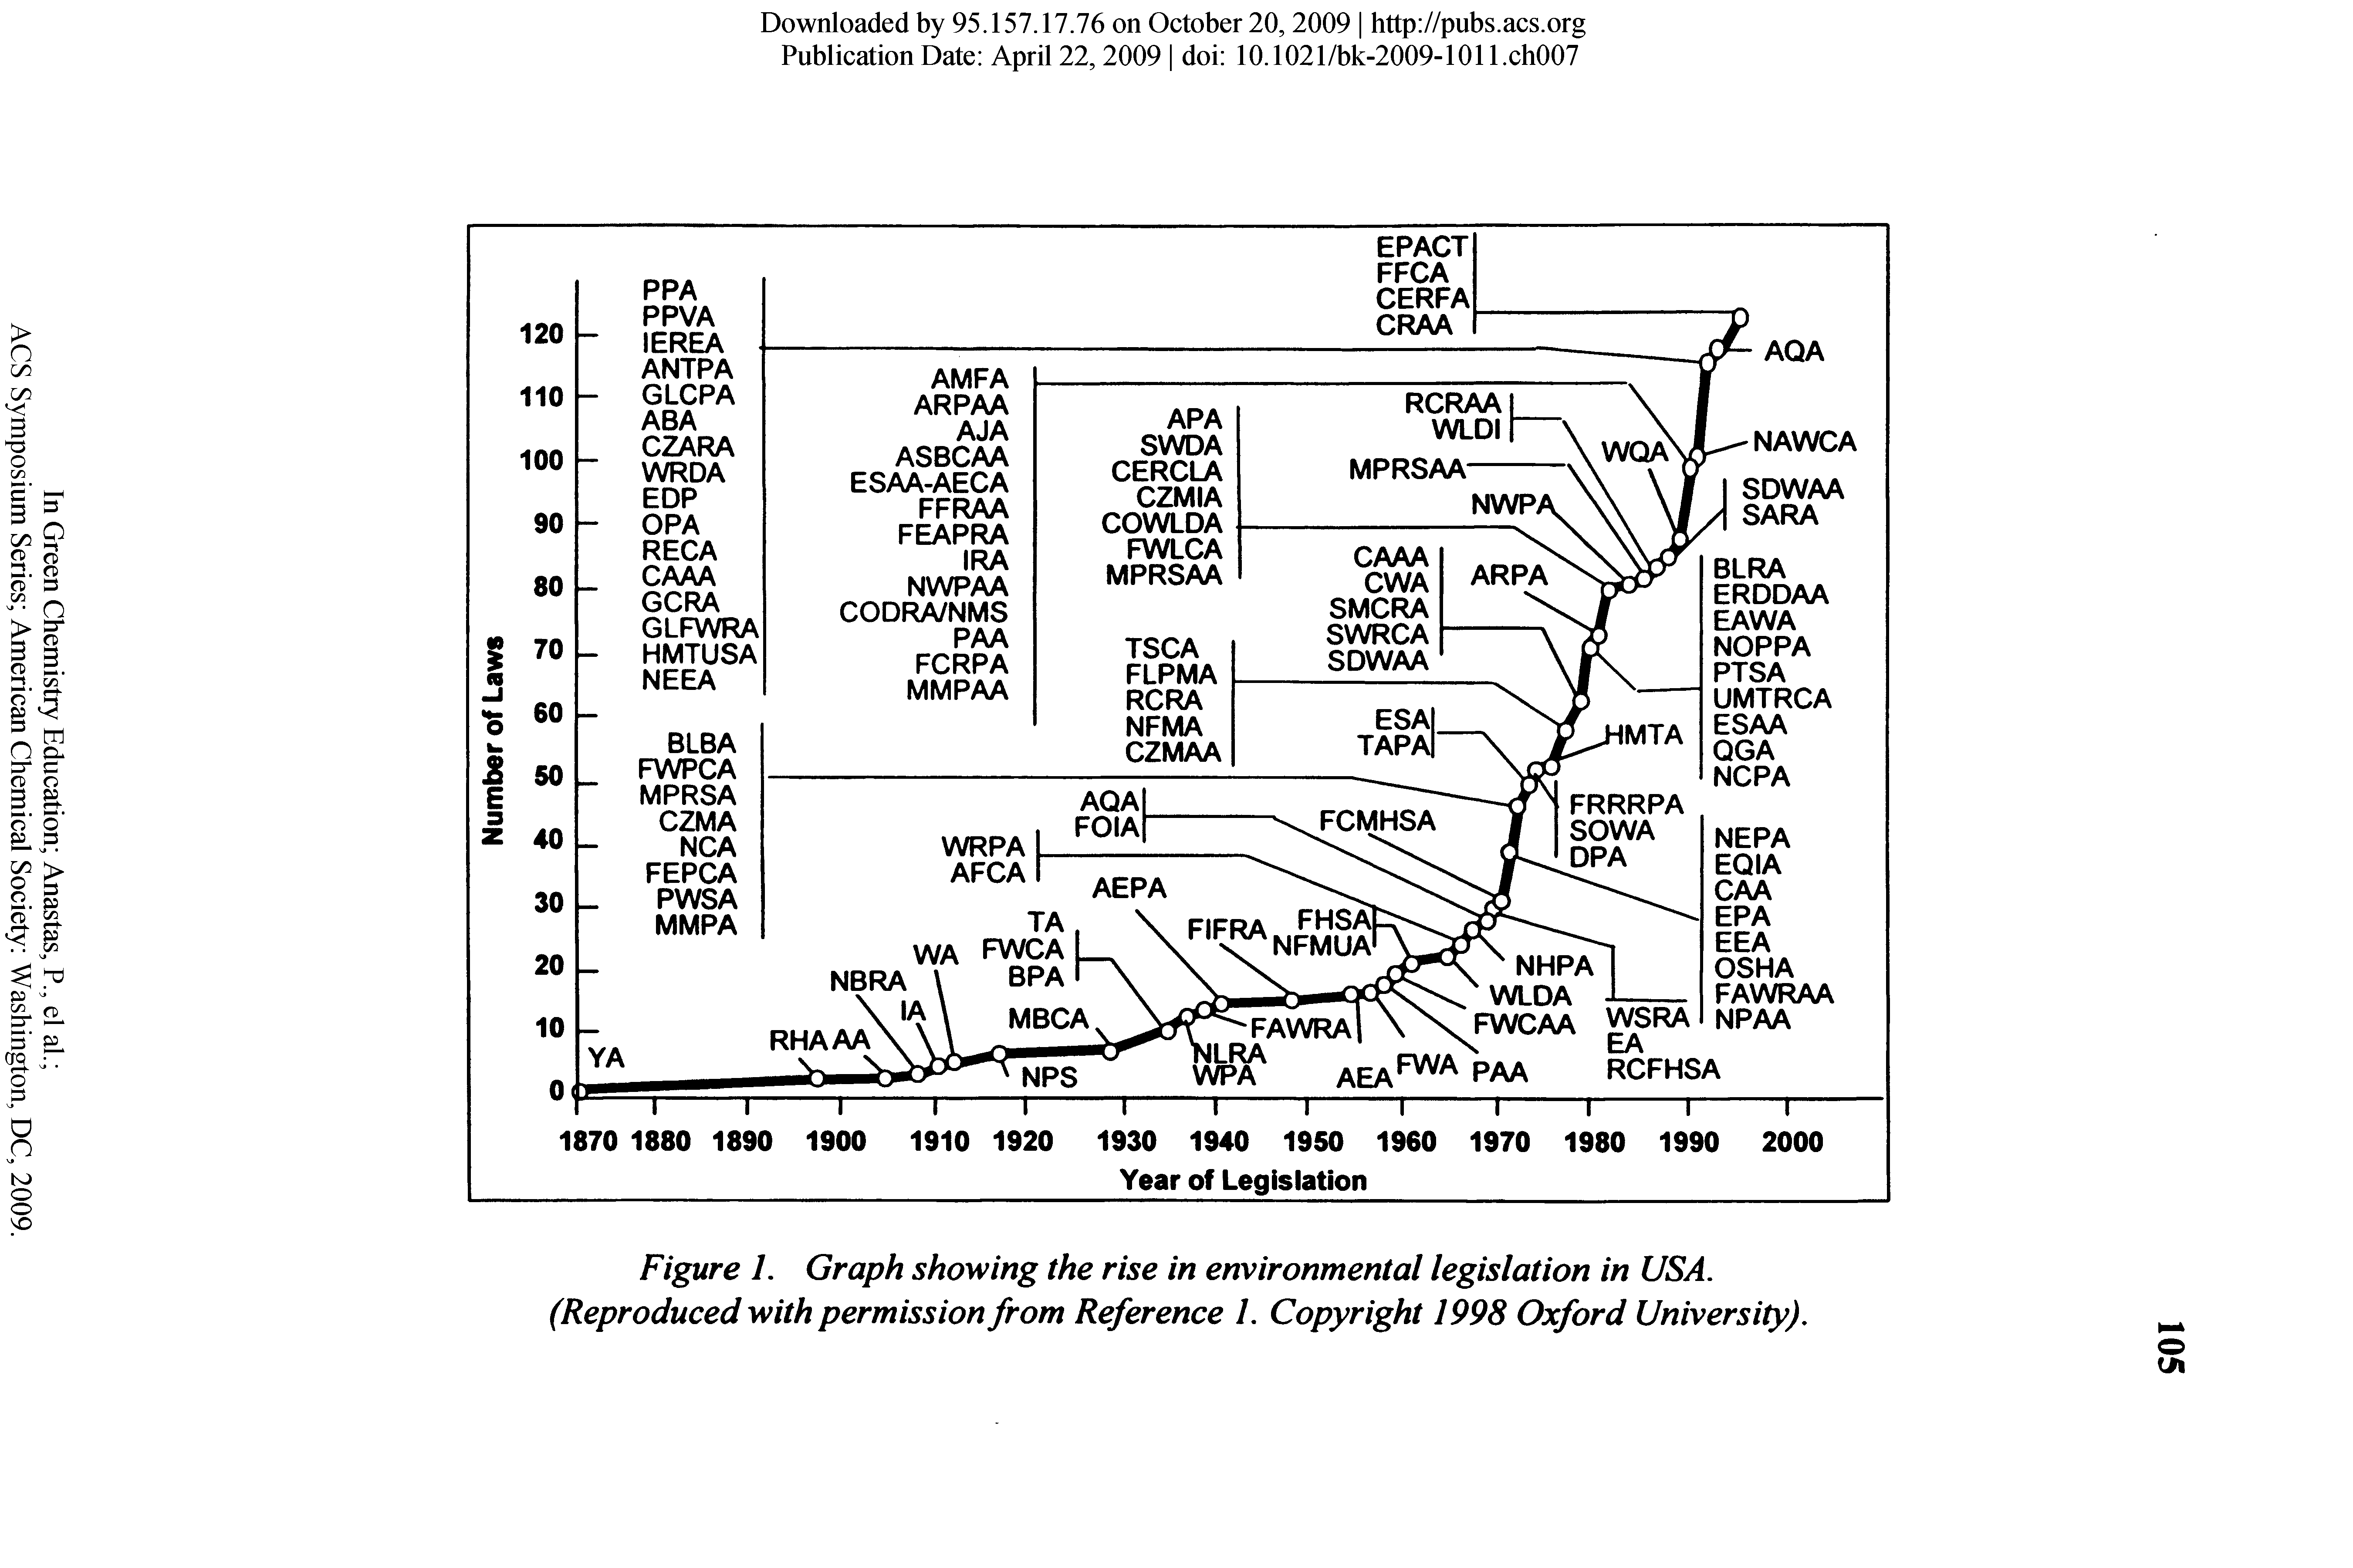 Figure 1. Graph showing the rise in environmental legislation in USA. (Reproduced with permission from Reference I. Copyright 1998 Oxford University).